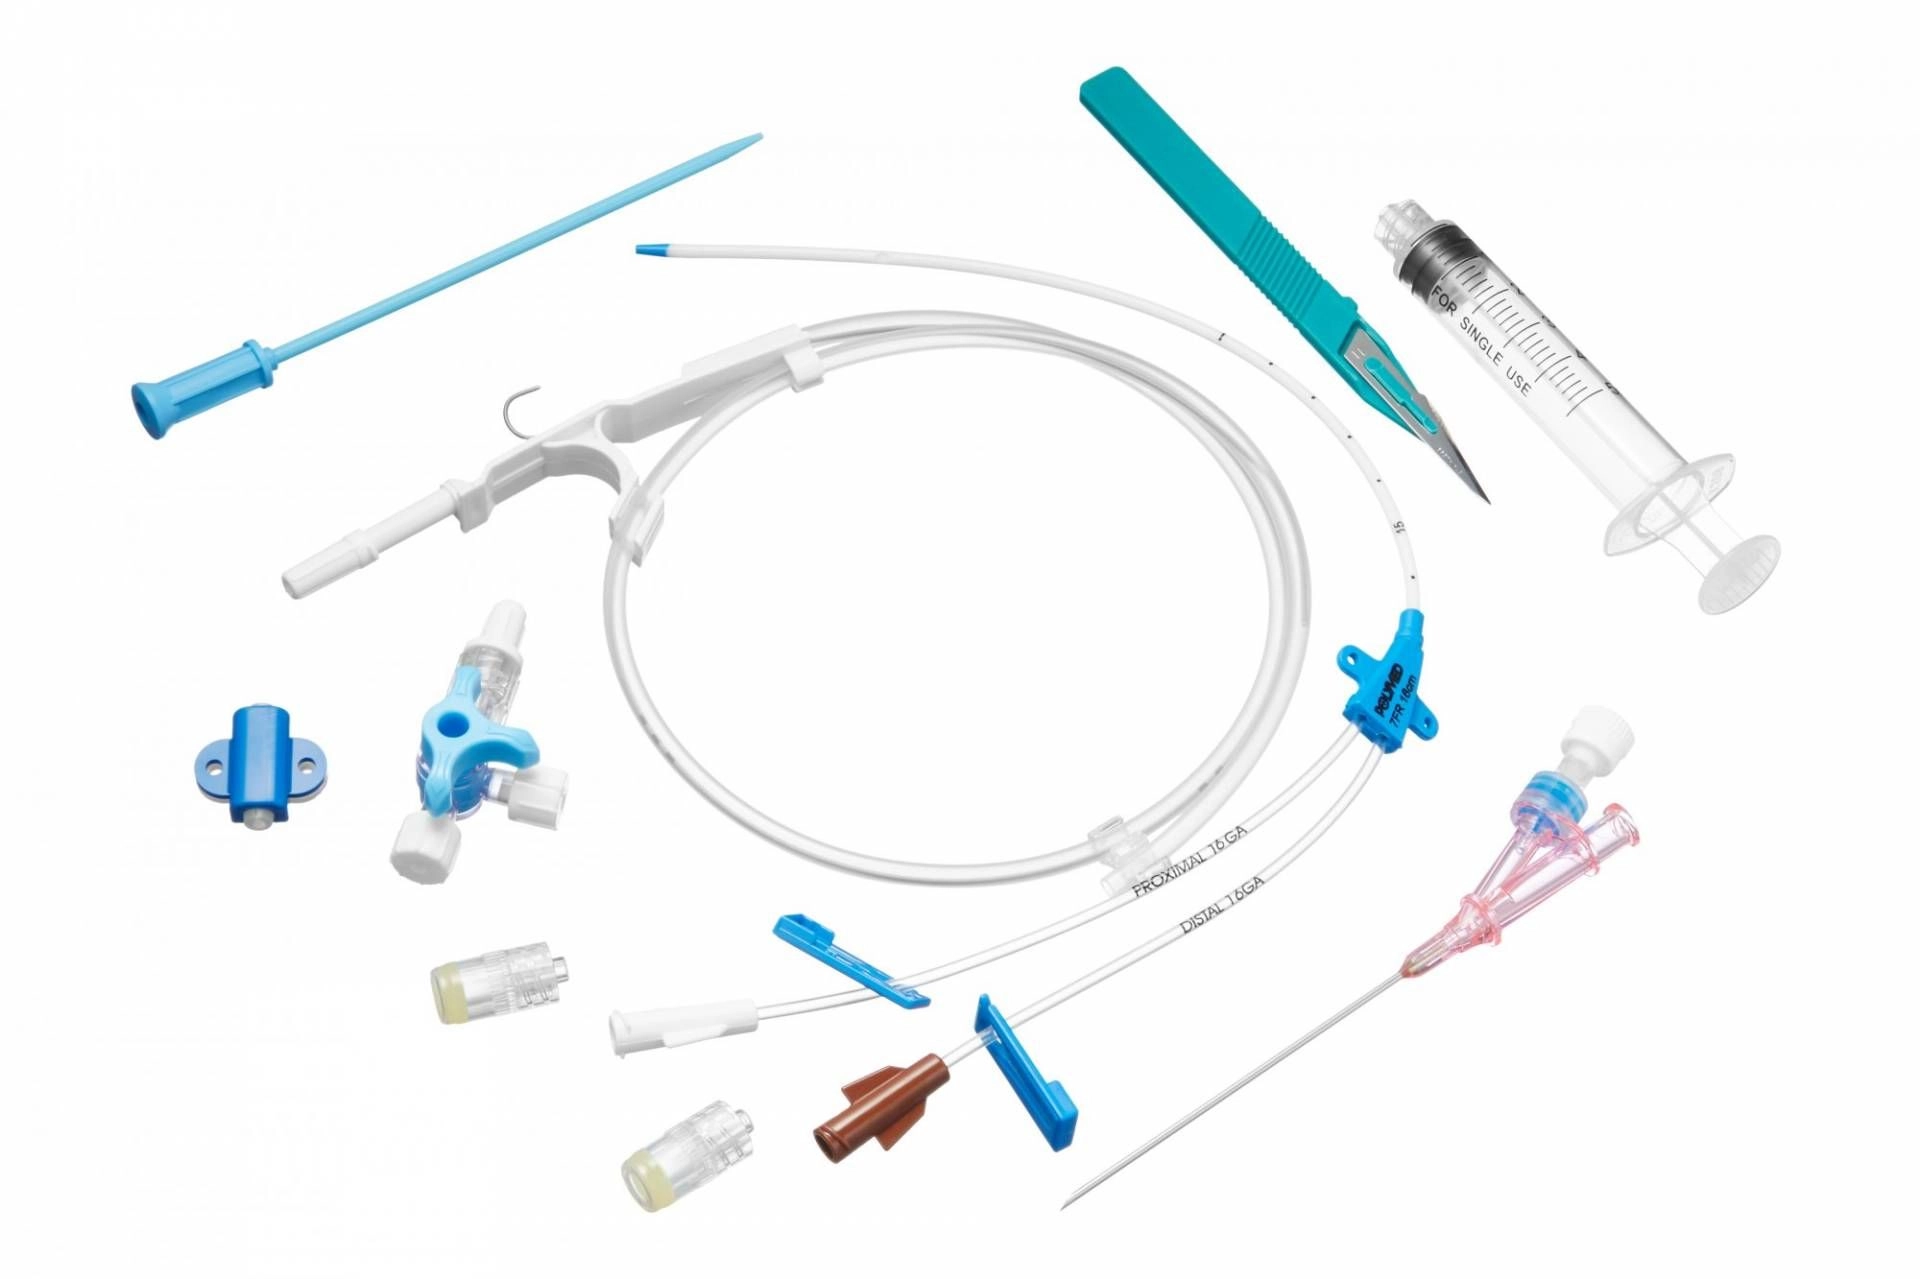 IV catheters and fluids